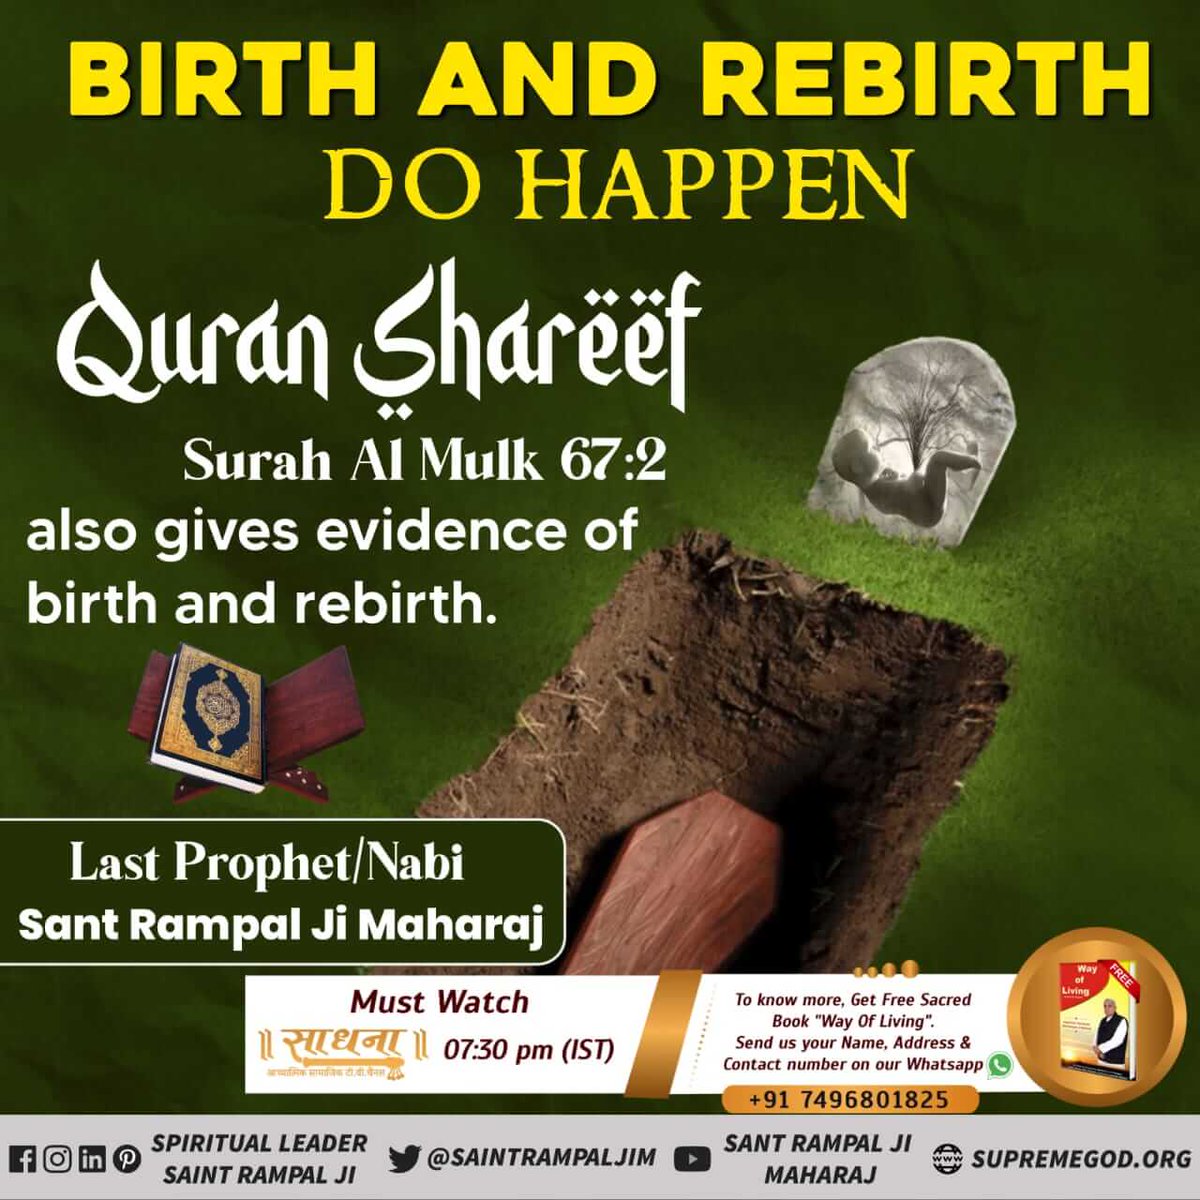 #पुनर्जन्म_का_रहस्य

In the Holy Quran, it is written in the chapter related to reincarnation in verse 11 of Surat Ar Room 30 -
Allah creates the universe for the first time and then will repeat it.

Rebirth In Islam